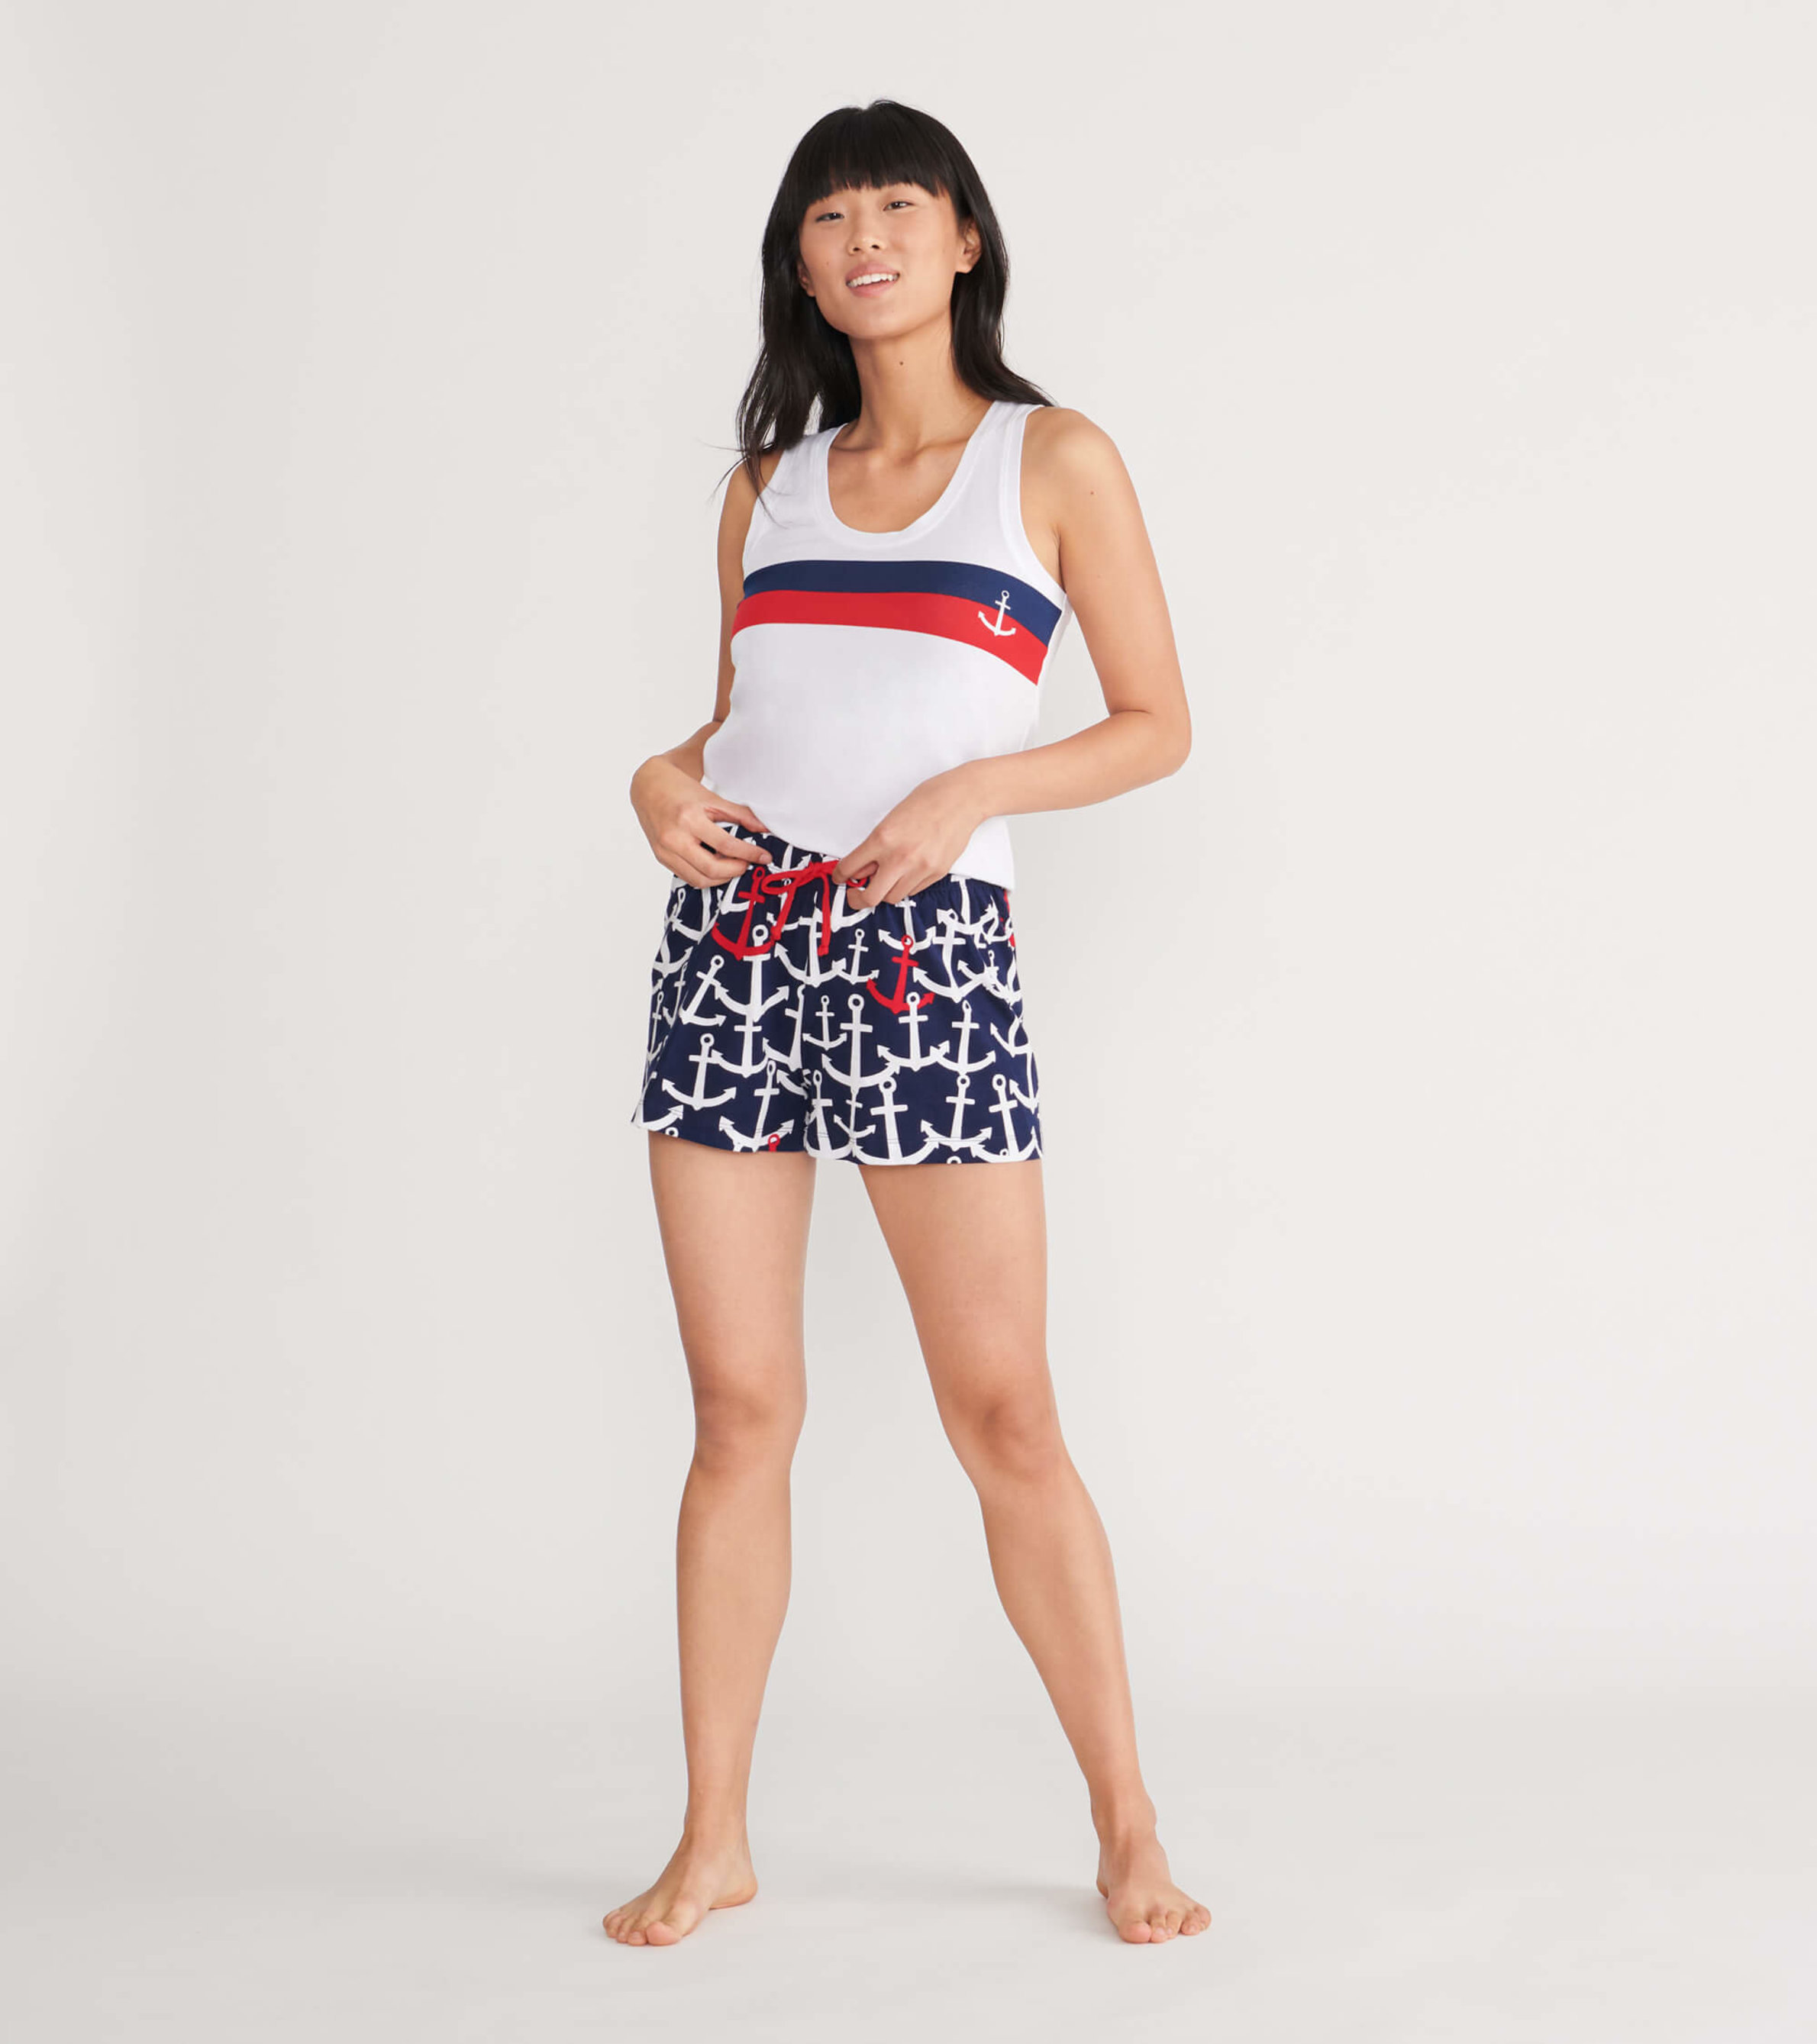 https://cdn.littlebluehouse.com/product_images/red-and-white-anchors-womens-sleep-shorts/BXAANCH001_A_jpg/pdp_zoom.jpg?c=1646401946&locale=us_en